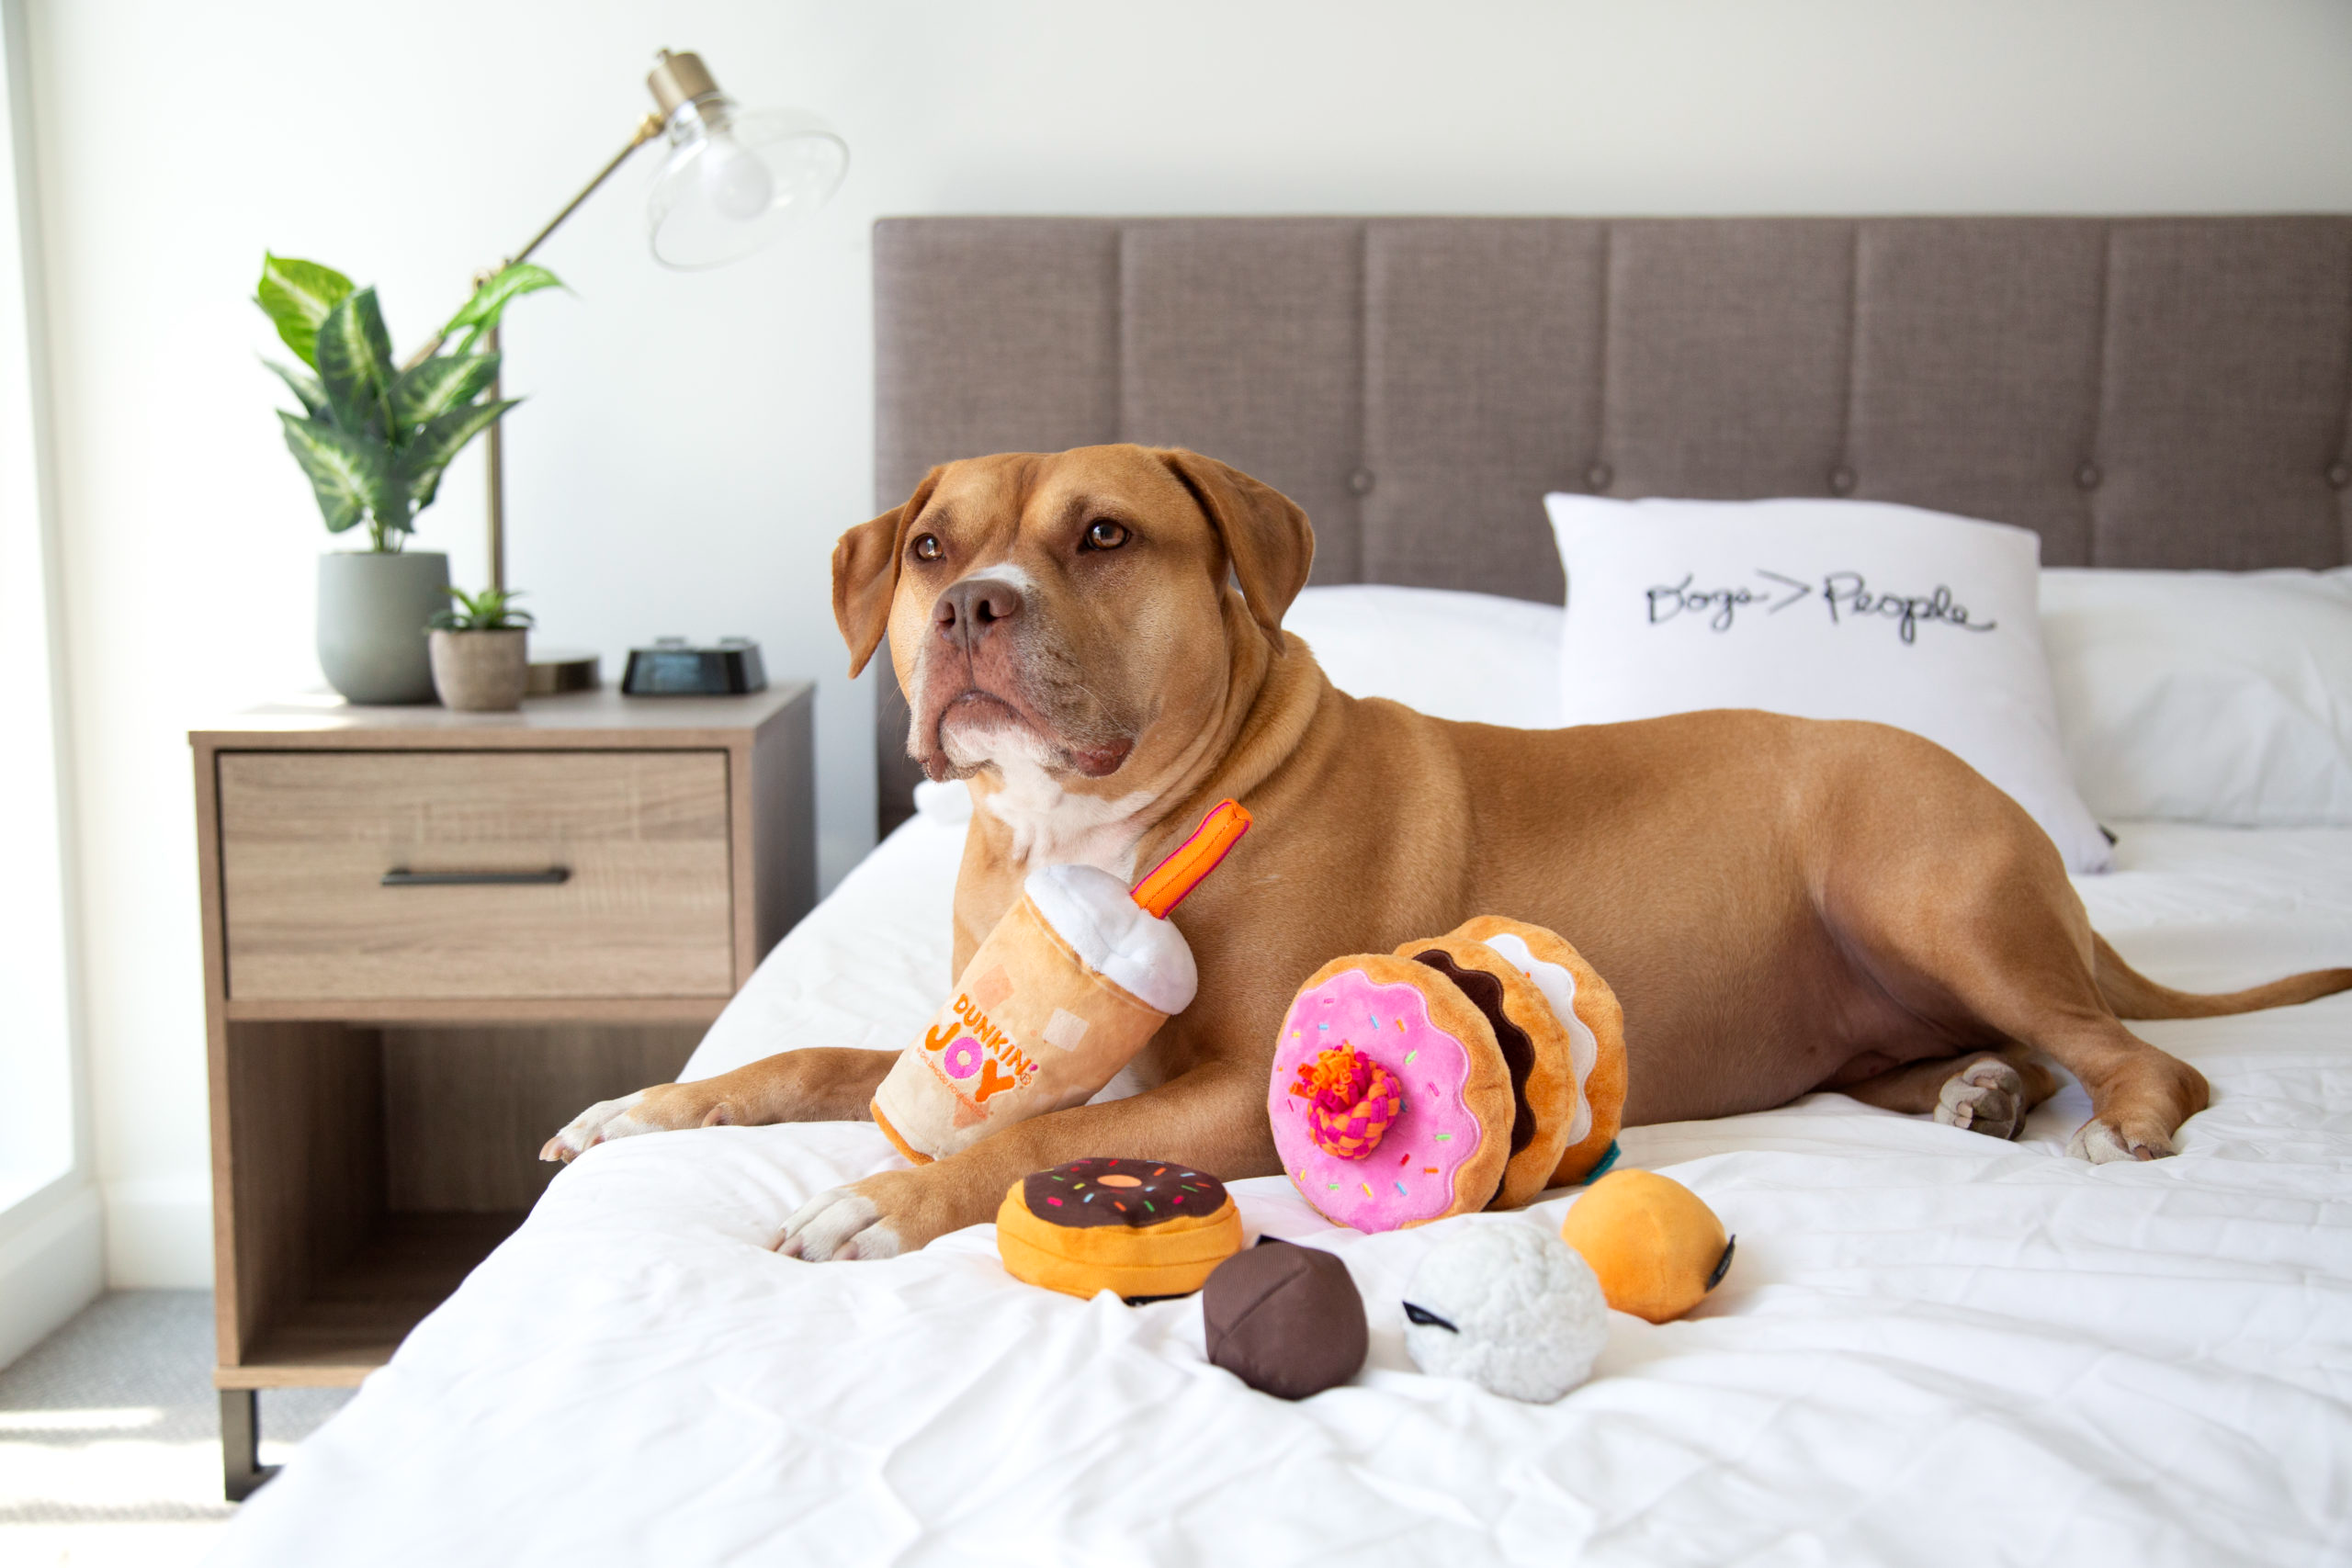 BARK and Dunkin’® Partner to Bring Joy This Holiday Season With Dog Toys That Give Back